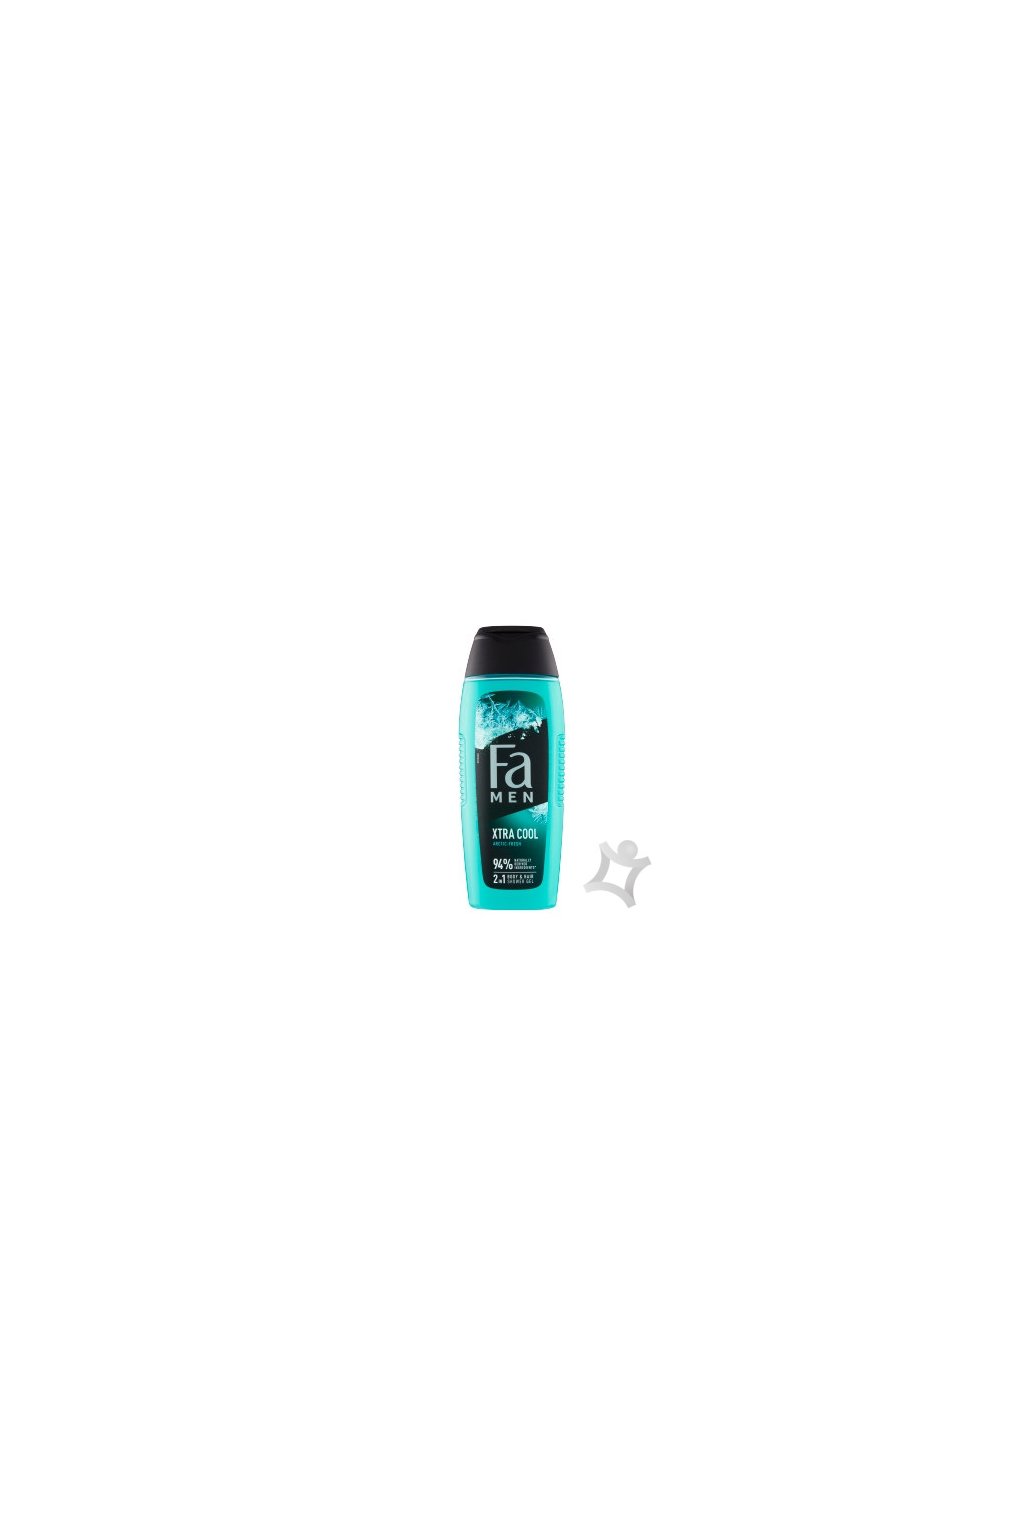 10530 fa sprchovy gel 400ml men extreme cool